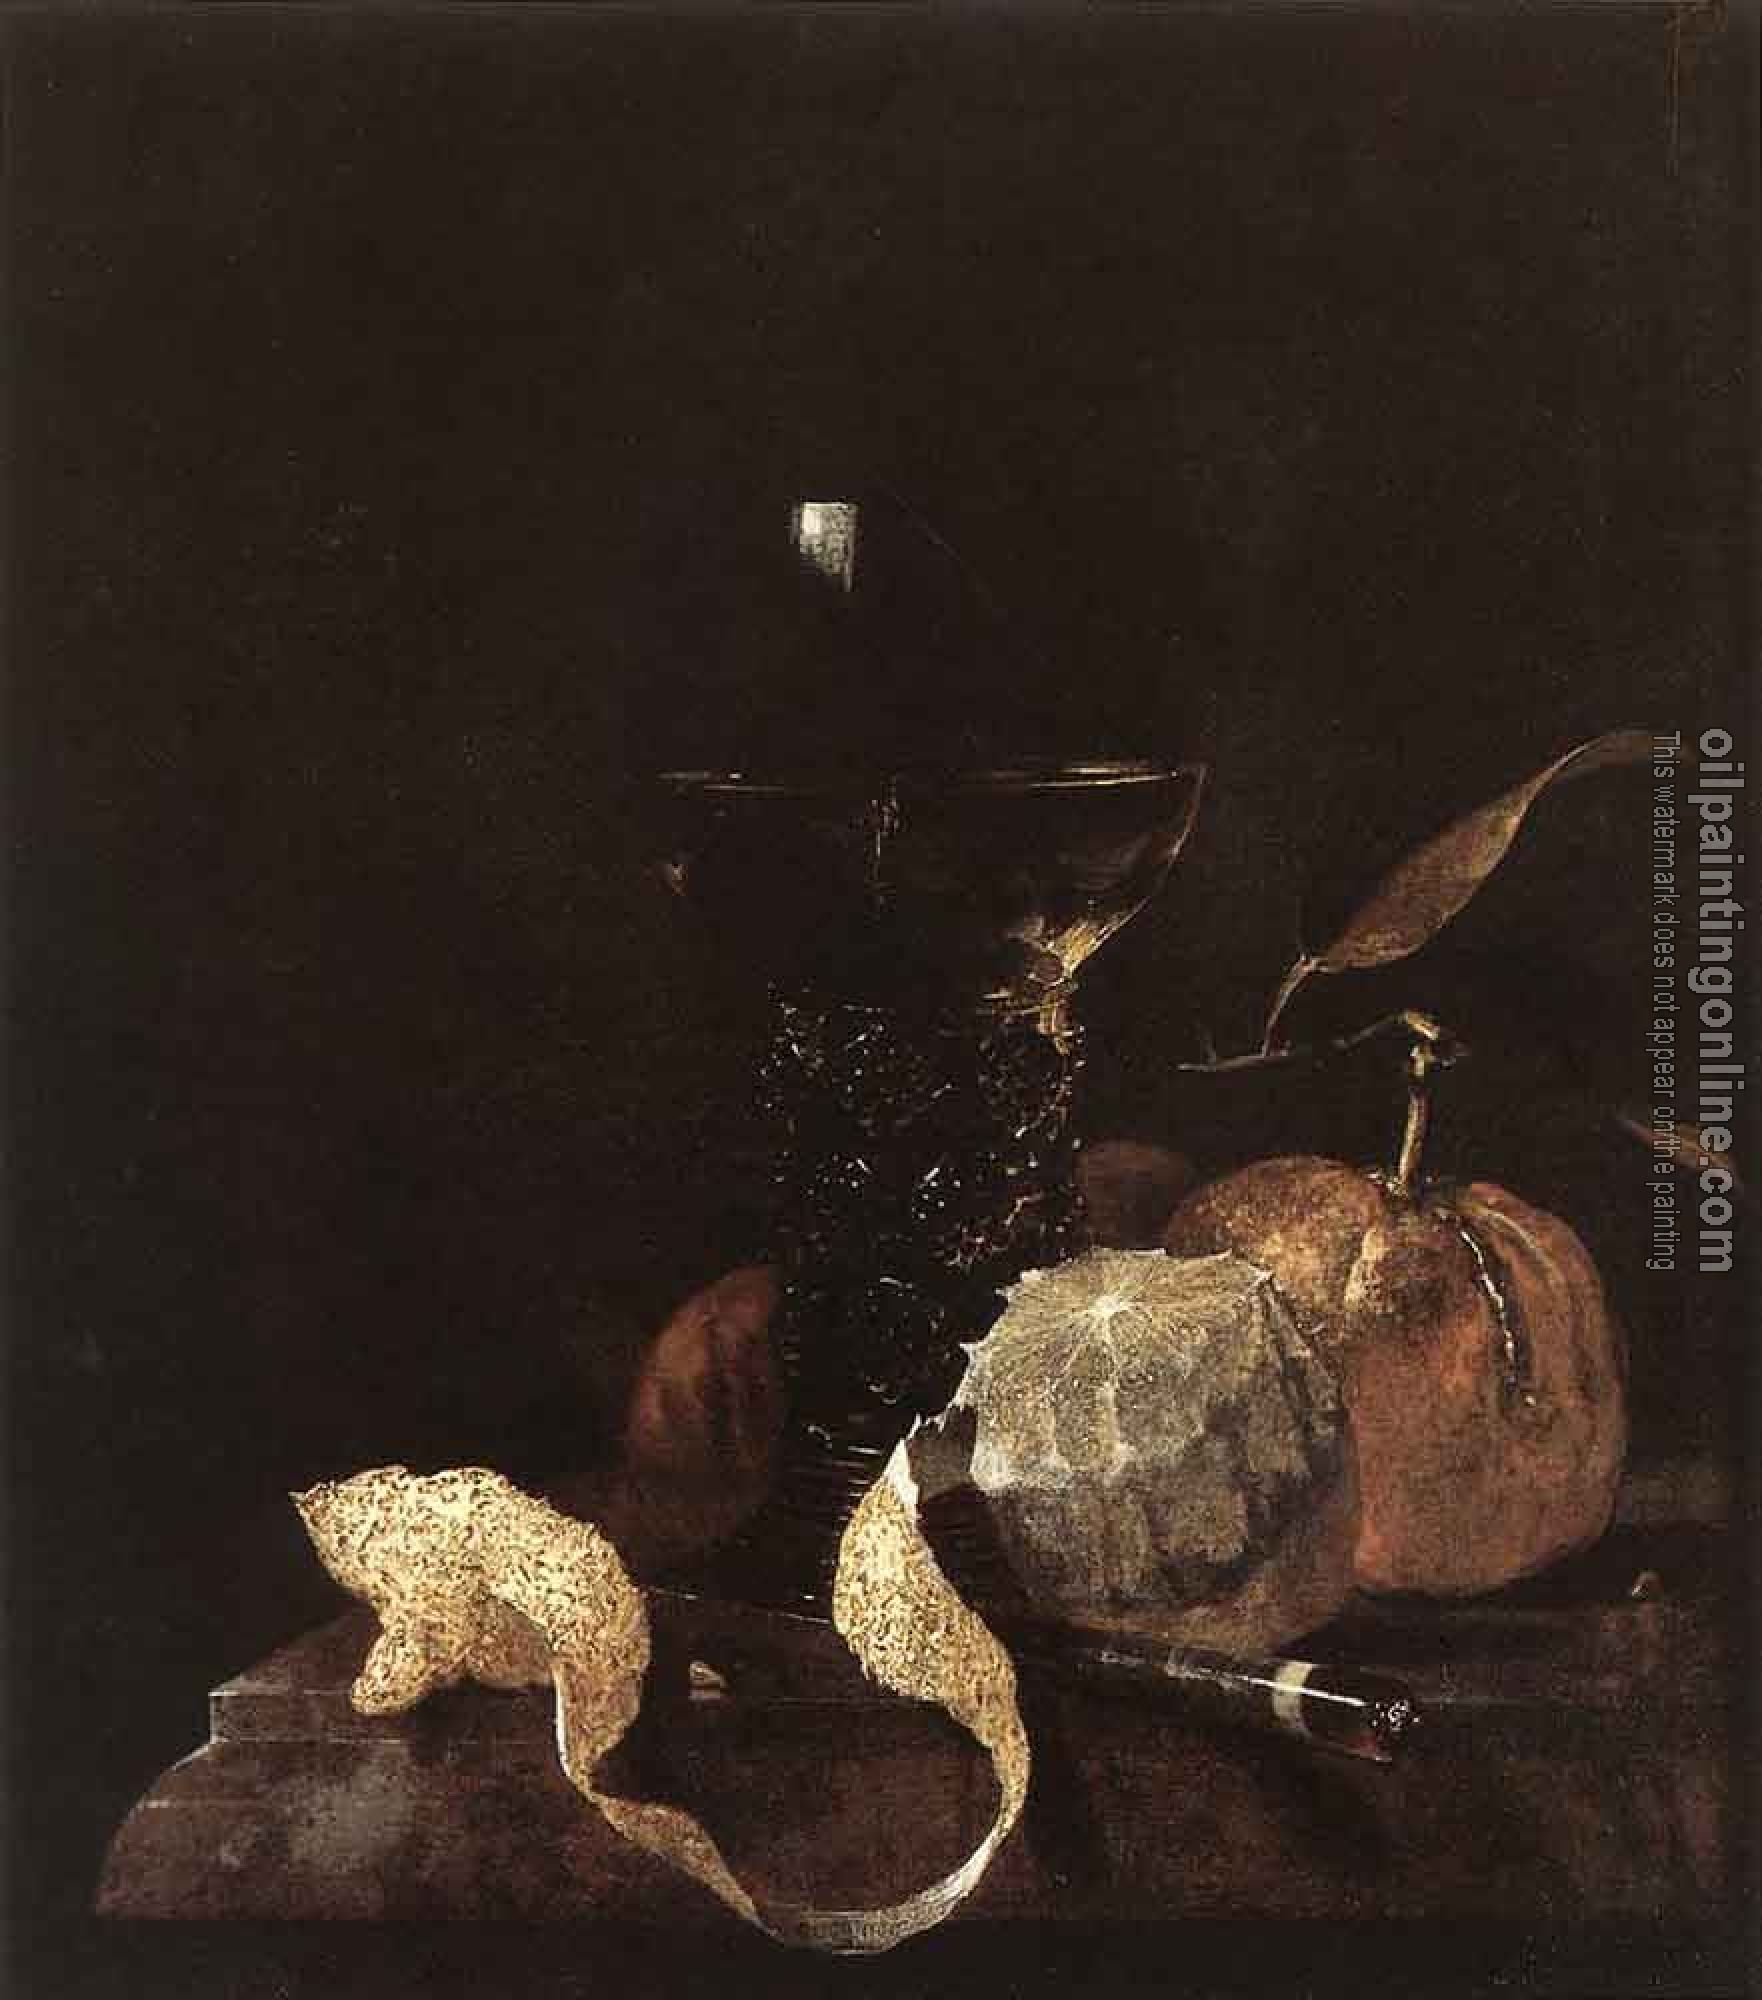 Willem Kalf - Still Life With Lemon Oranges And Glass Of Wine